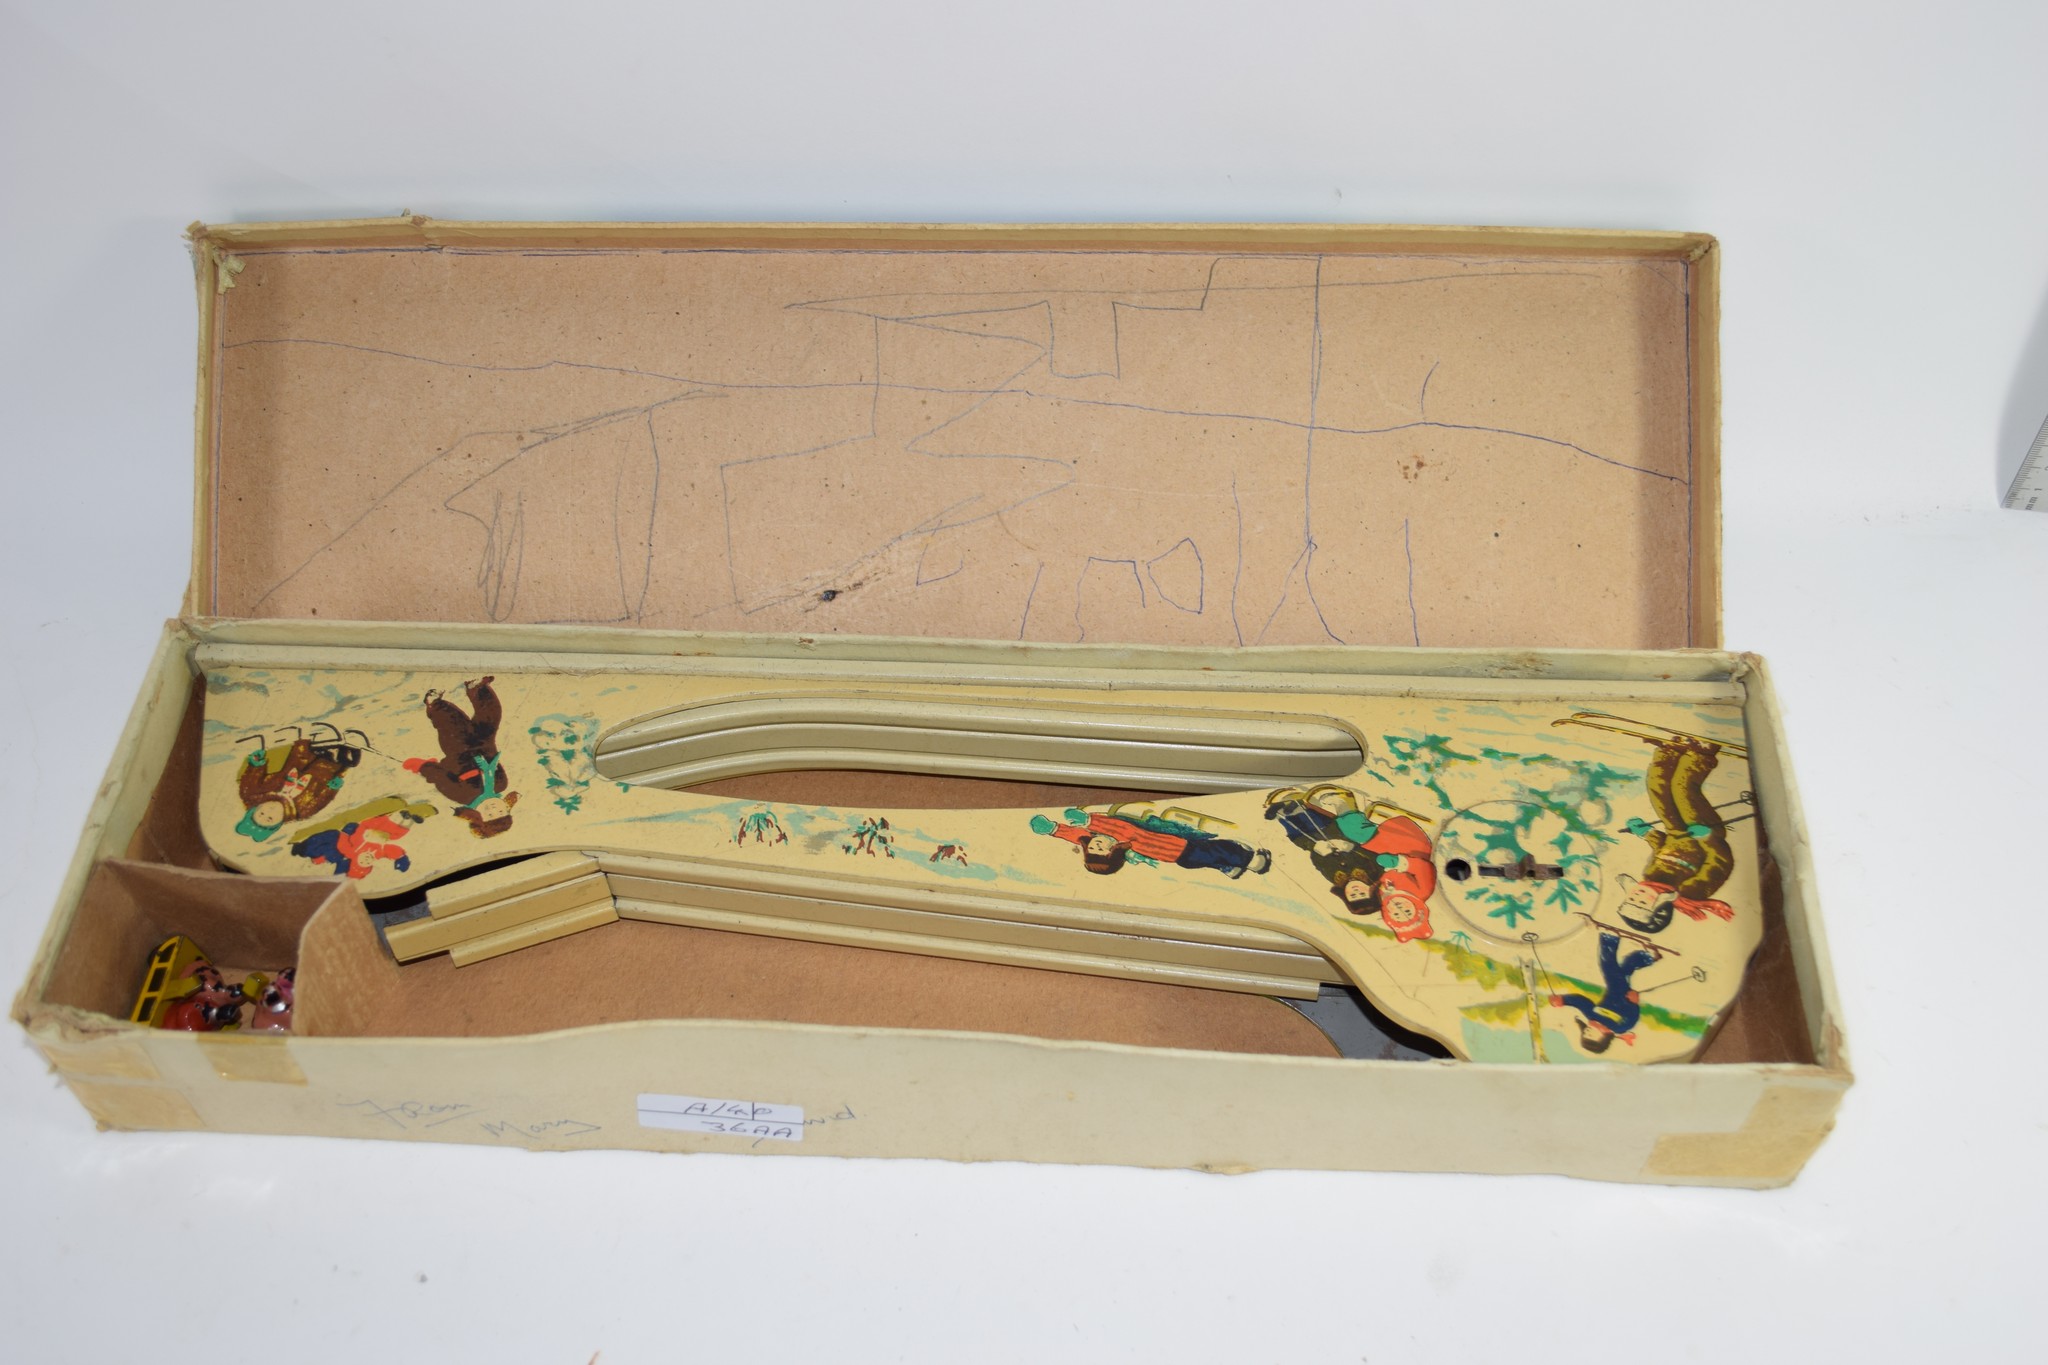 BOXED TINPLATE SLEDGING GAME PROBABLY RUSSIAN OR EASTERN EUROPIAN - Image 2 of 2